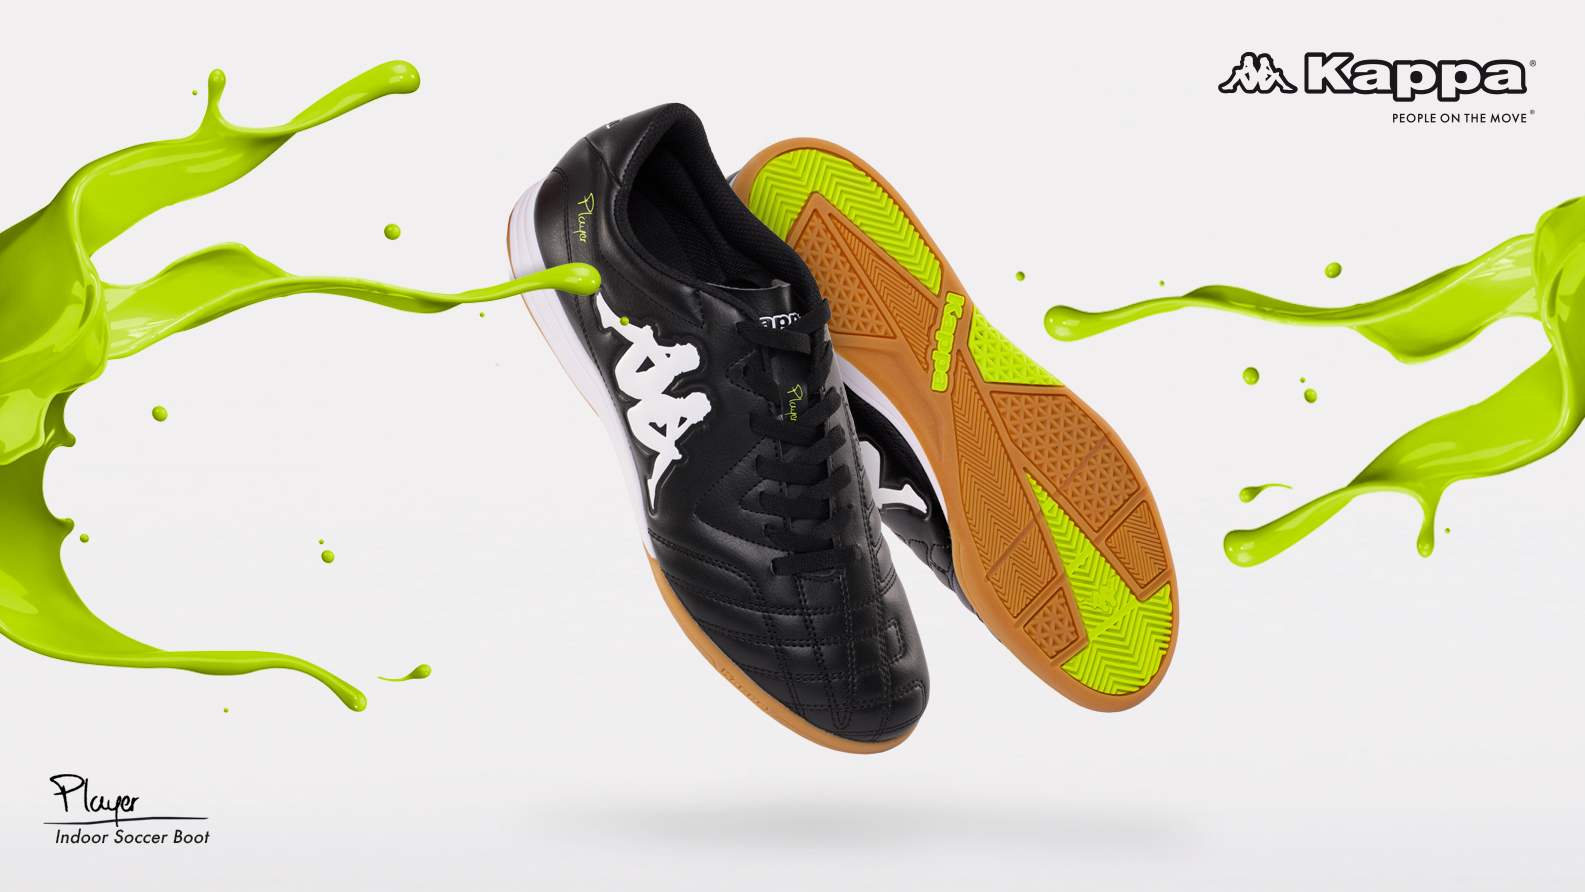 Kappa Australia, Player Indoor Soccer Boot Campaign